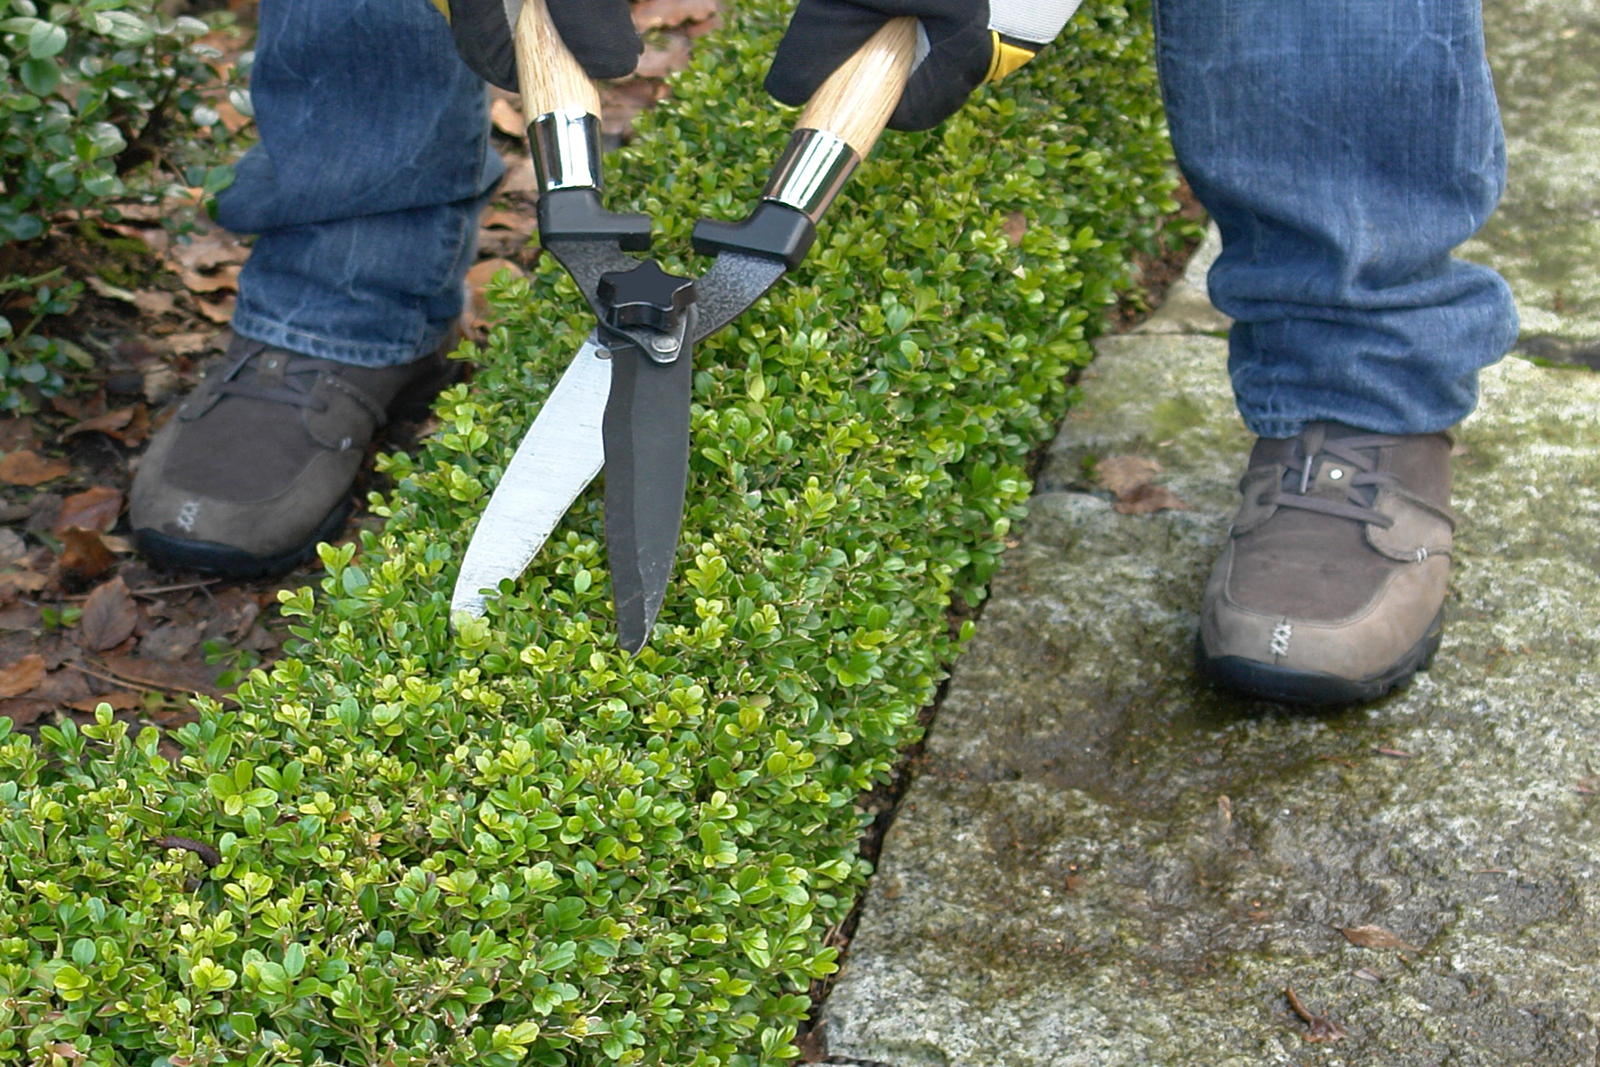 Professional Gardeners and Landscapers